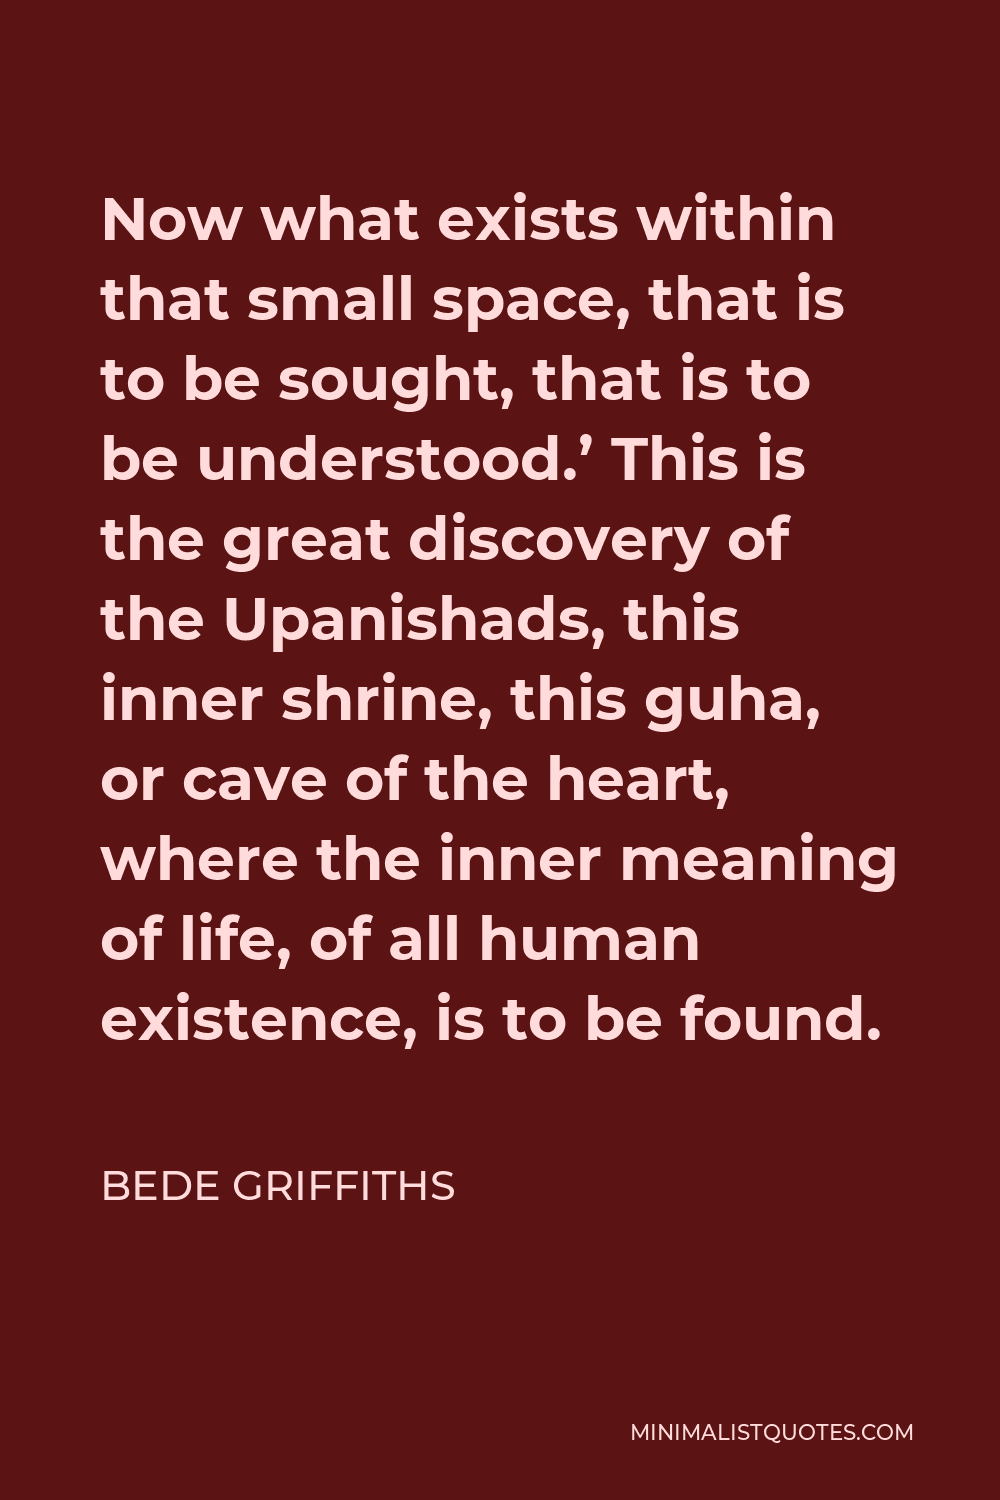 Bede Griffiths Quote - Now what exists within that small space, that is to be sought, that is to be understood.’ This is the great discovery of the Upanishads, this inner shrine, this guha, or cave of the heart, where the inner meaning of life, of all human existence, is to be found.